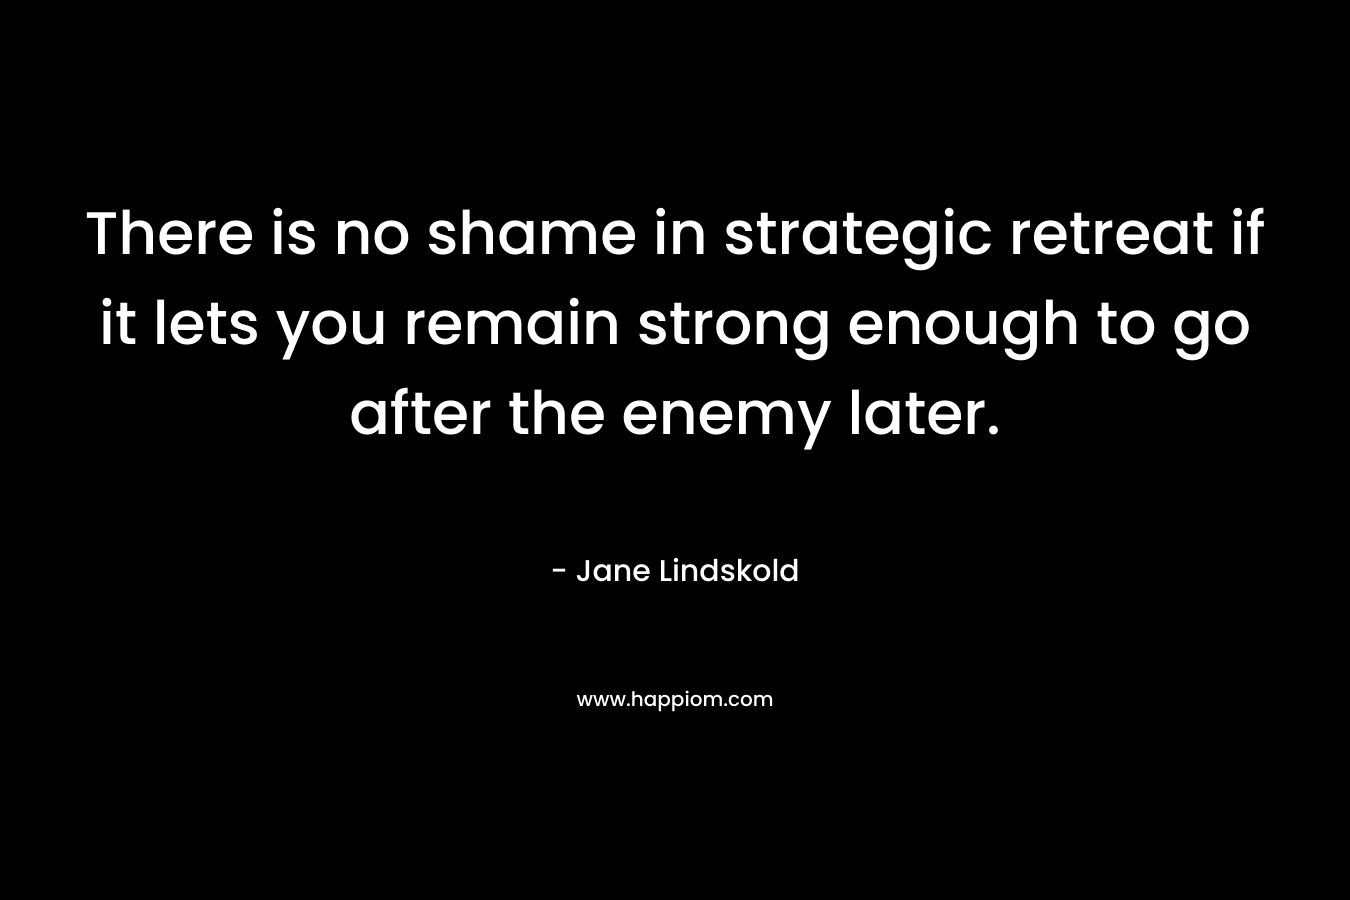 There is no shame in strategic retreat if it lets you remain strong enough to go after the enemy later.